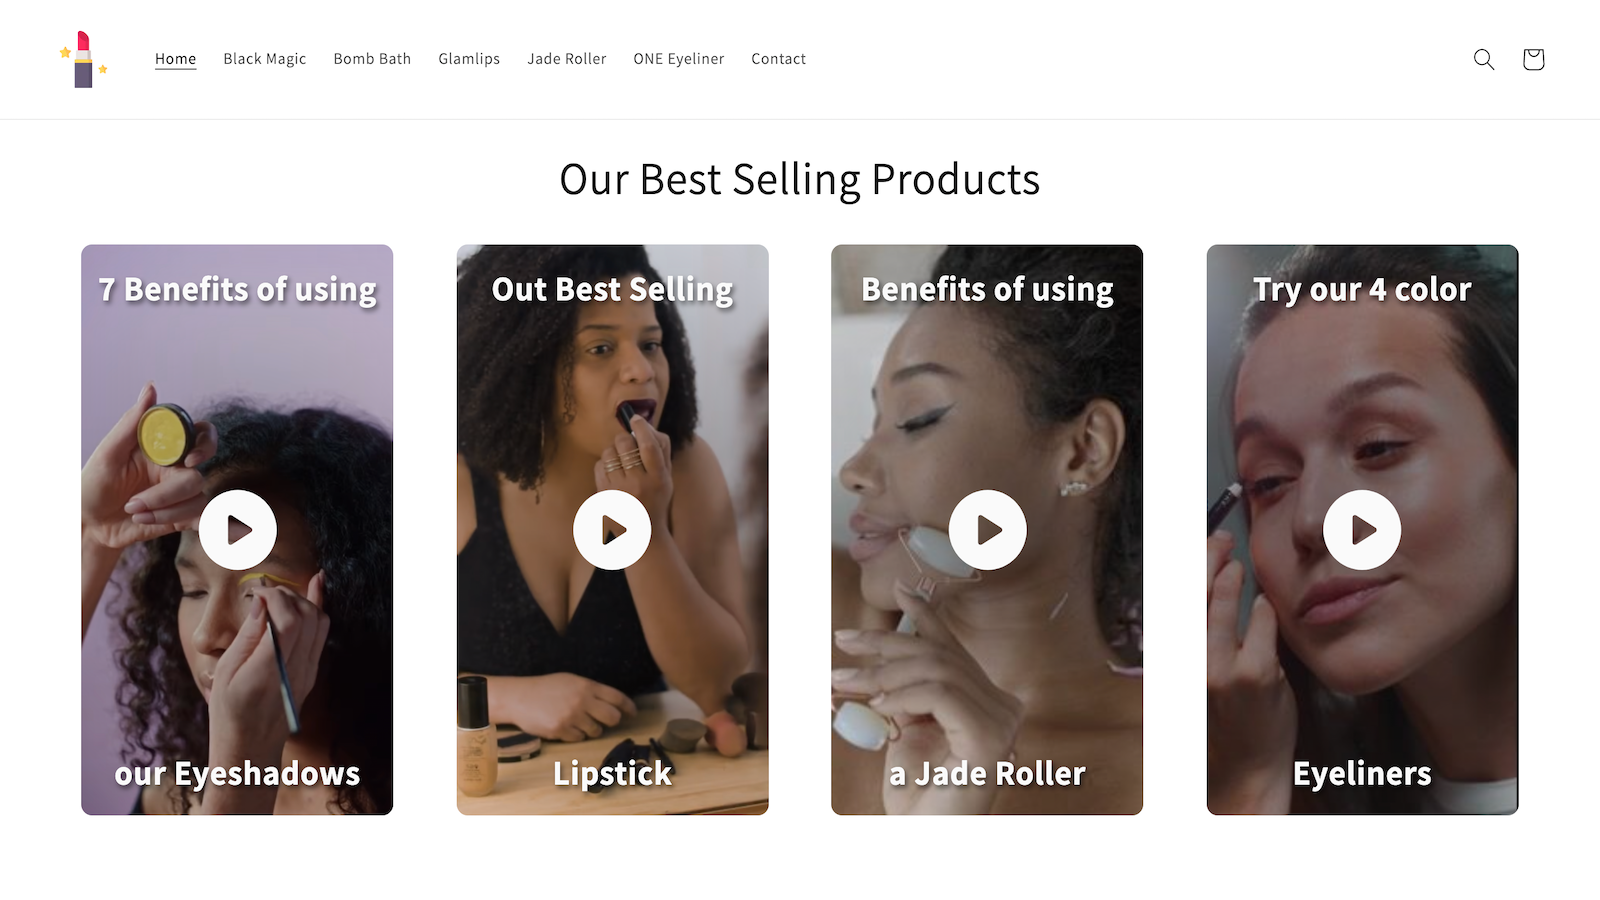 Carousel Shoppable Videos on Homepage